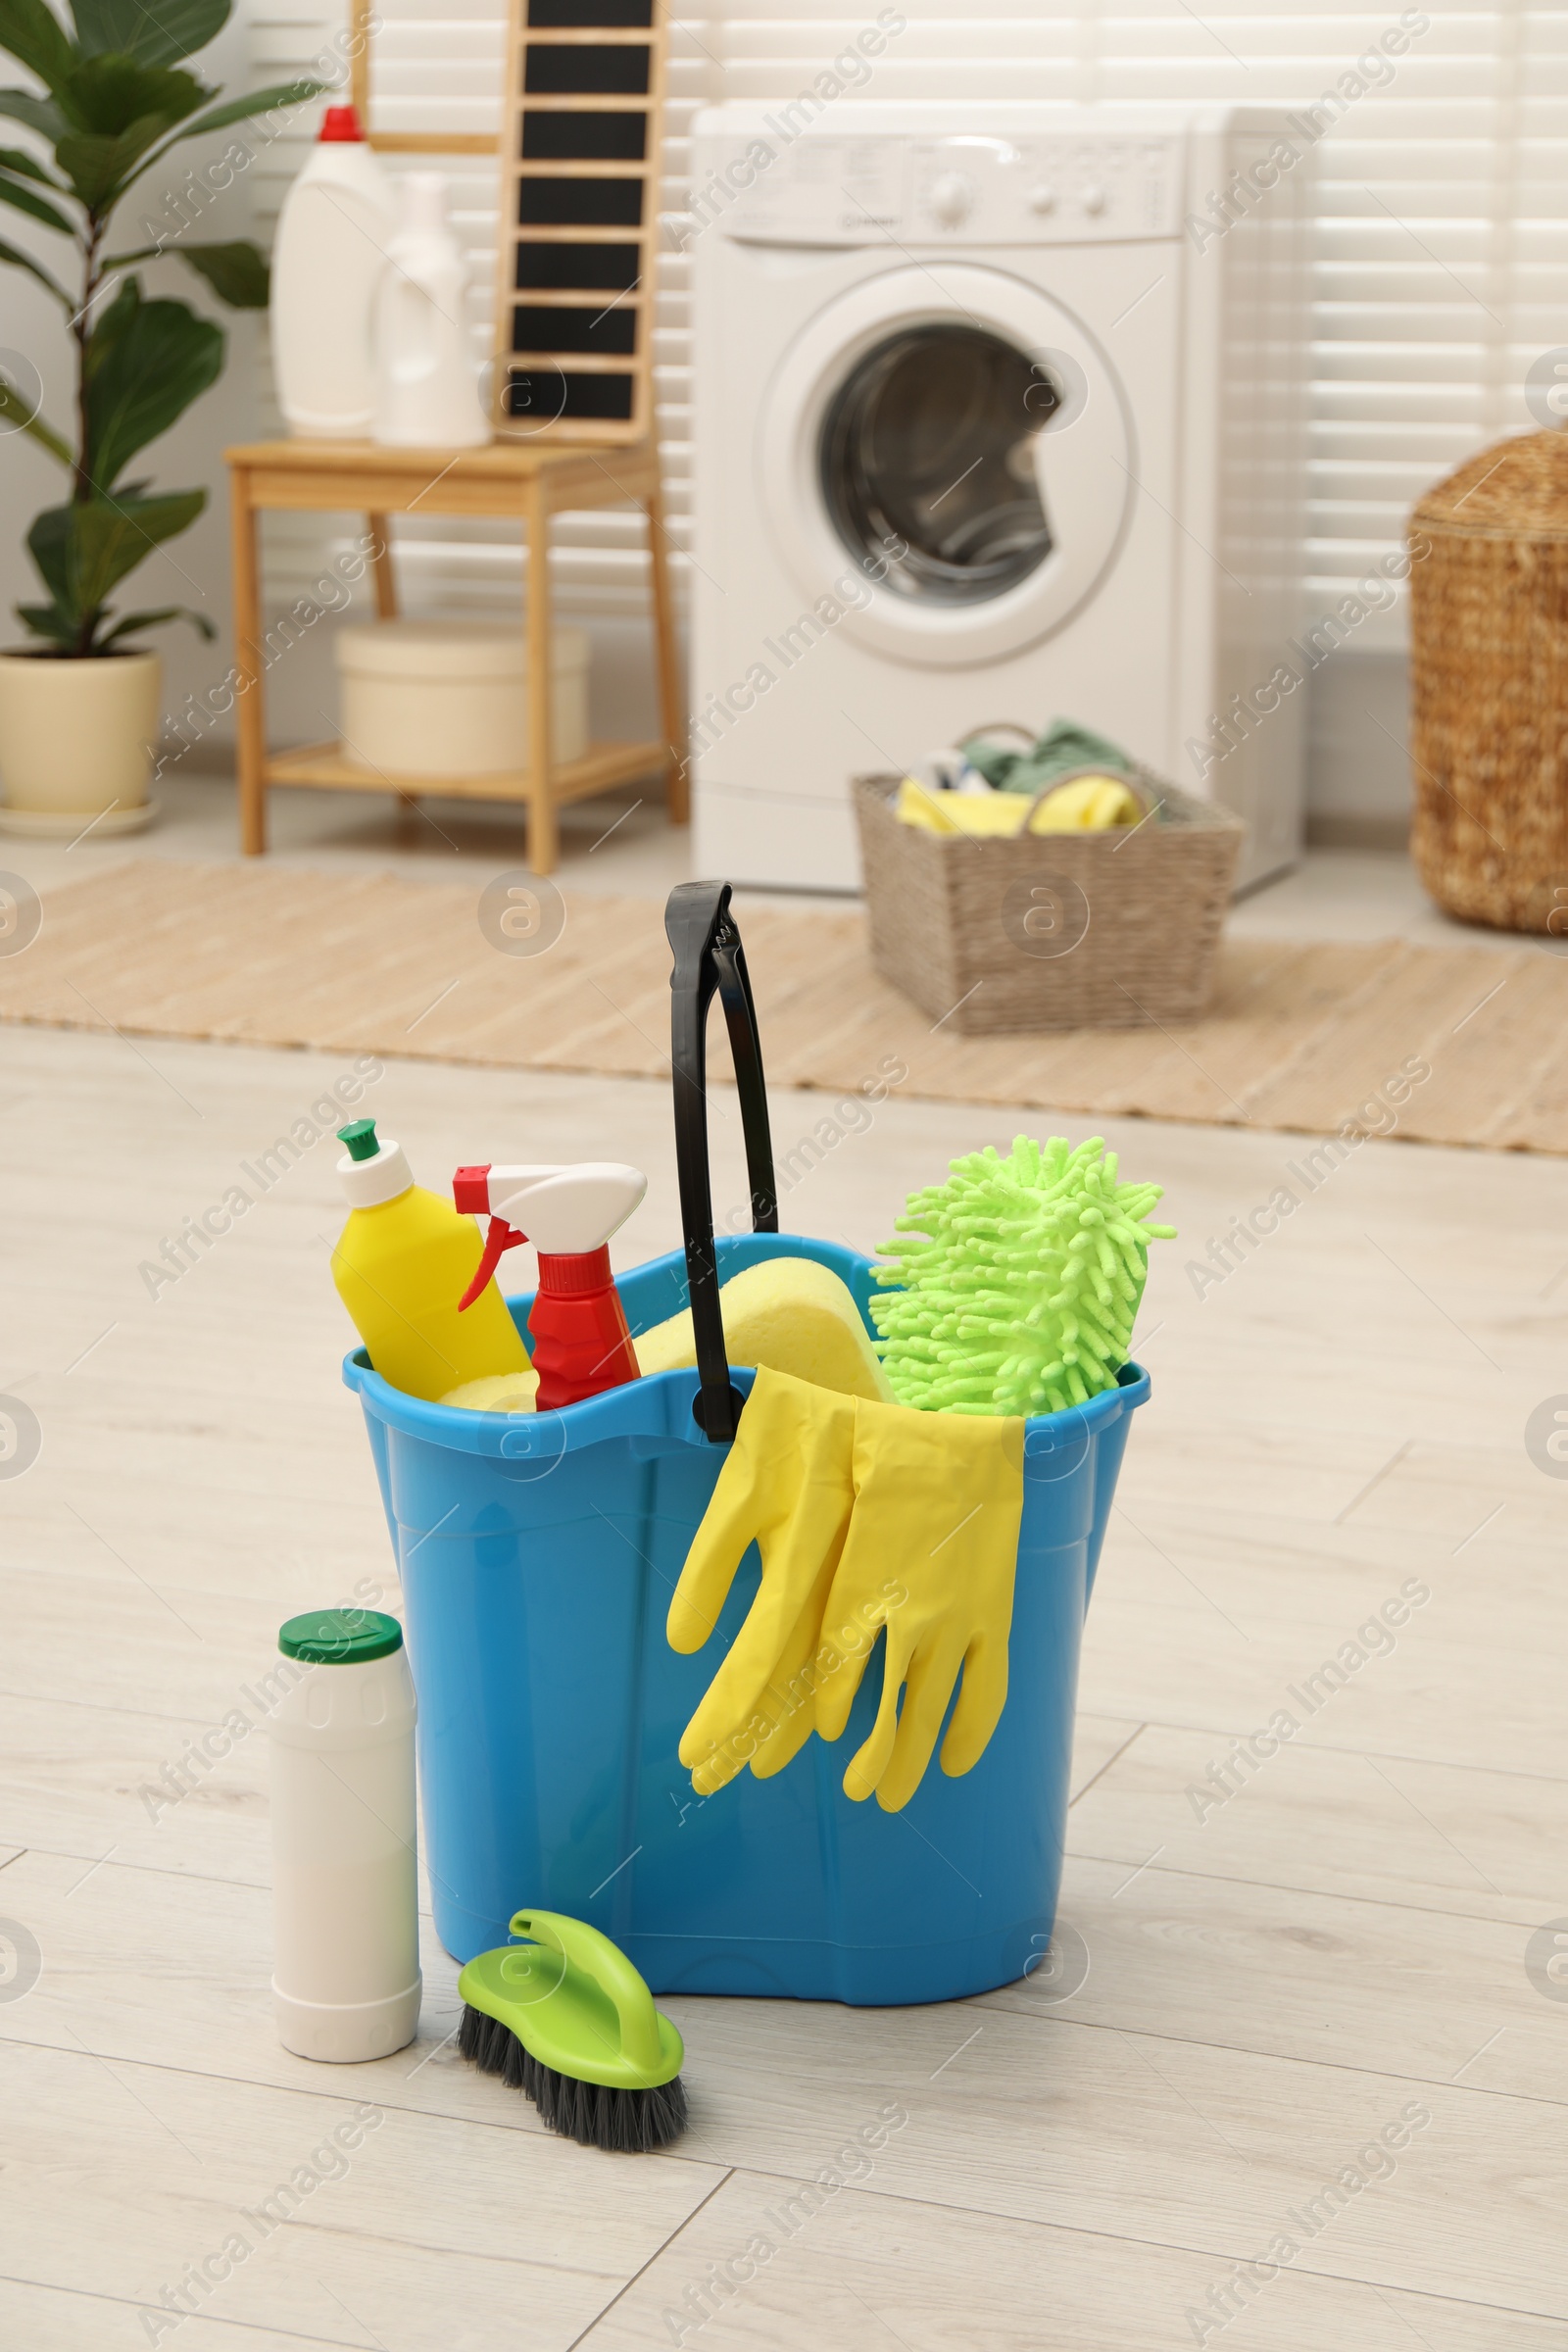 Photo of Different cleaning products and bucket on floor indoors